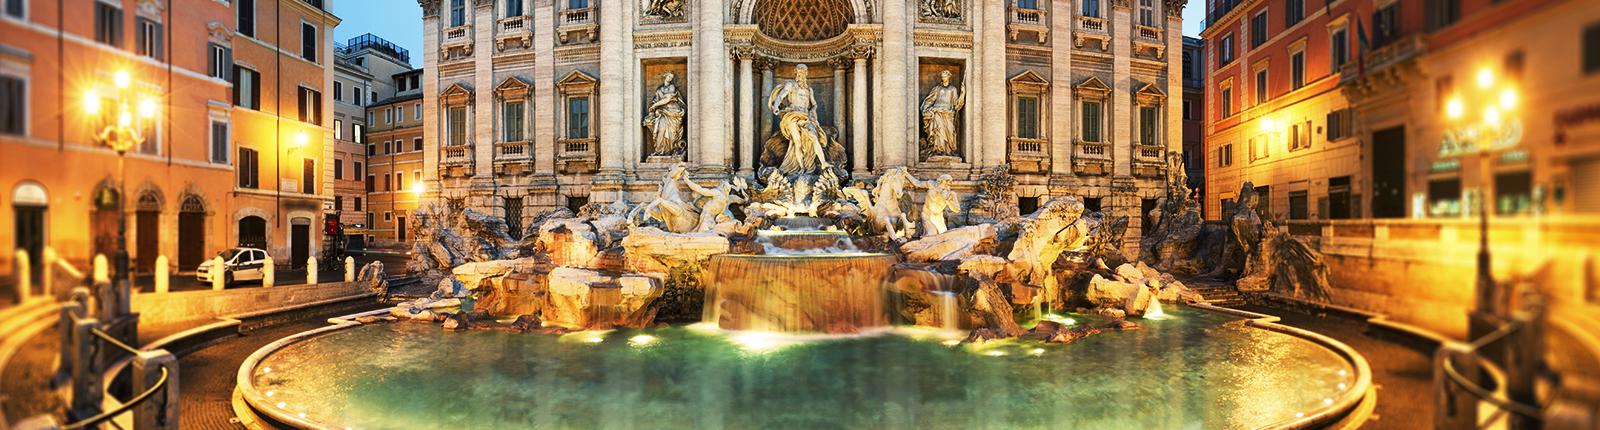 Dusk at the Trevi Fountain in Rome, Italy